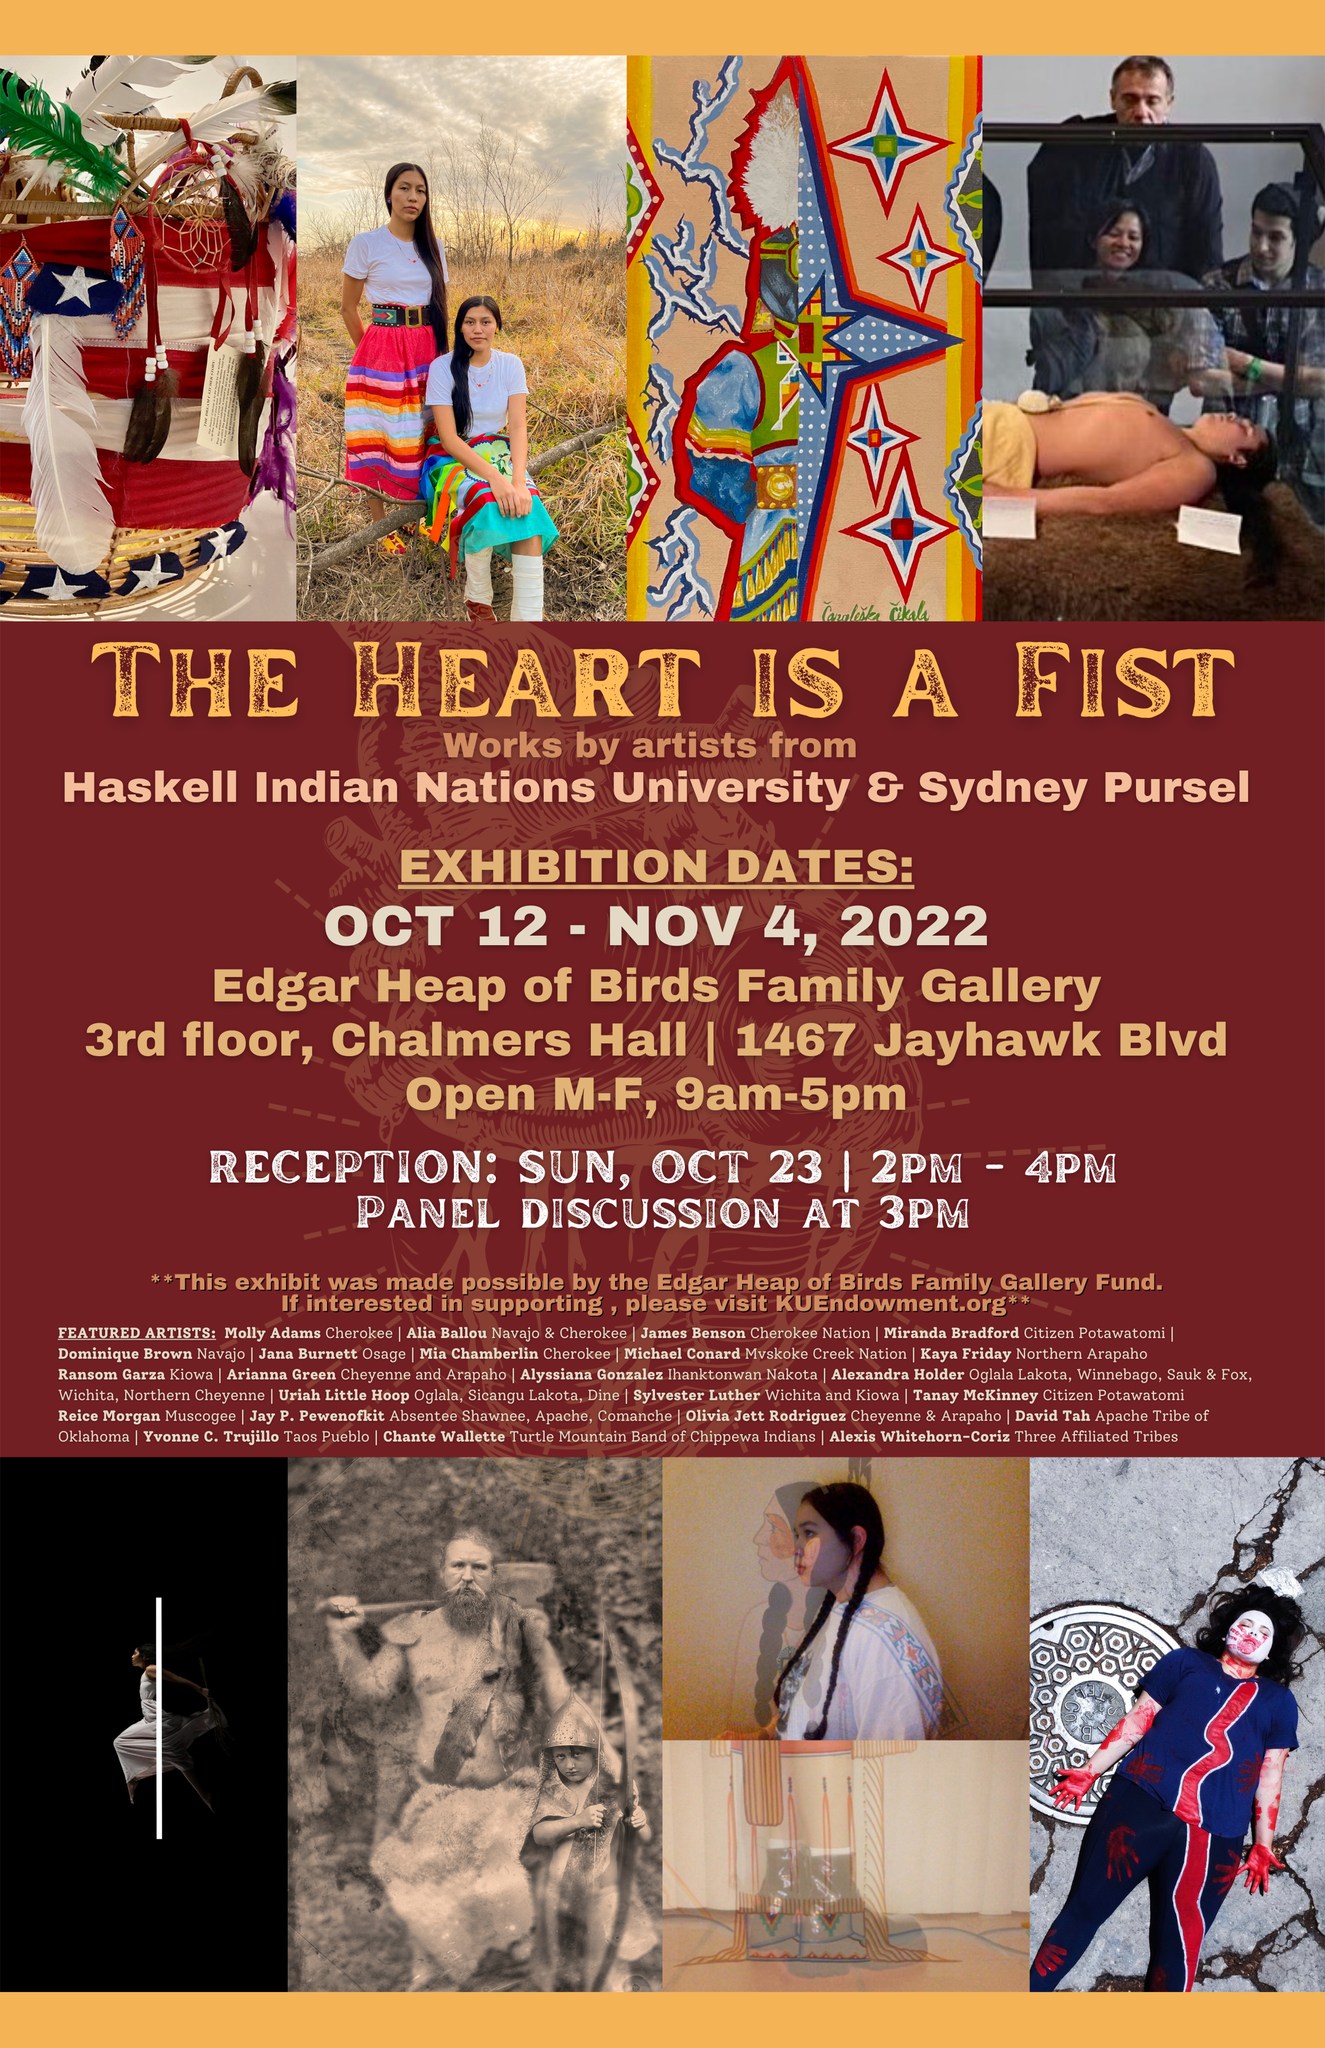 Exhibition poster for "The Heart Is a Fist"